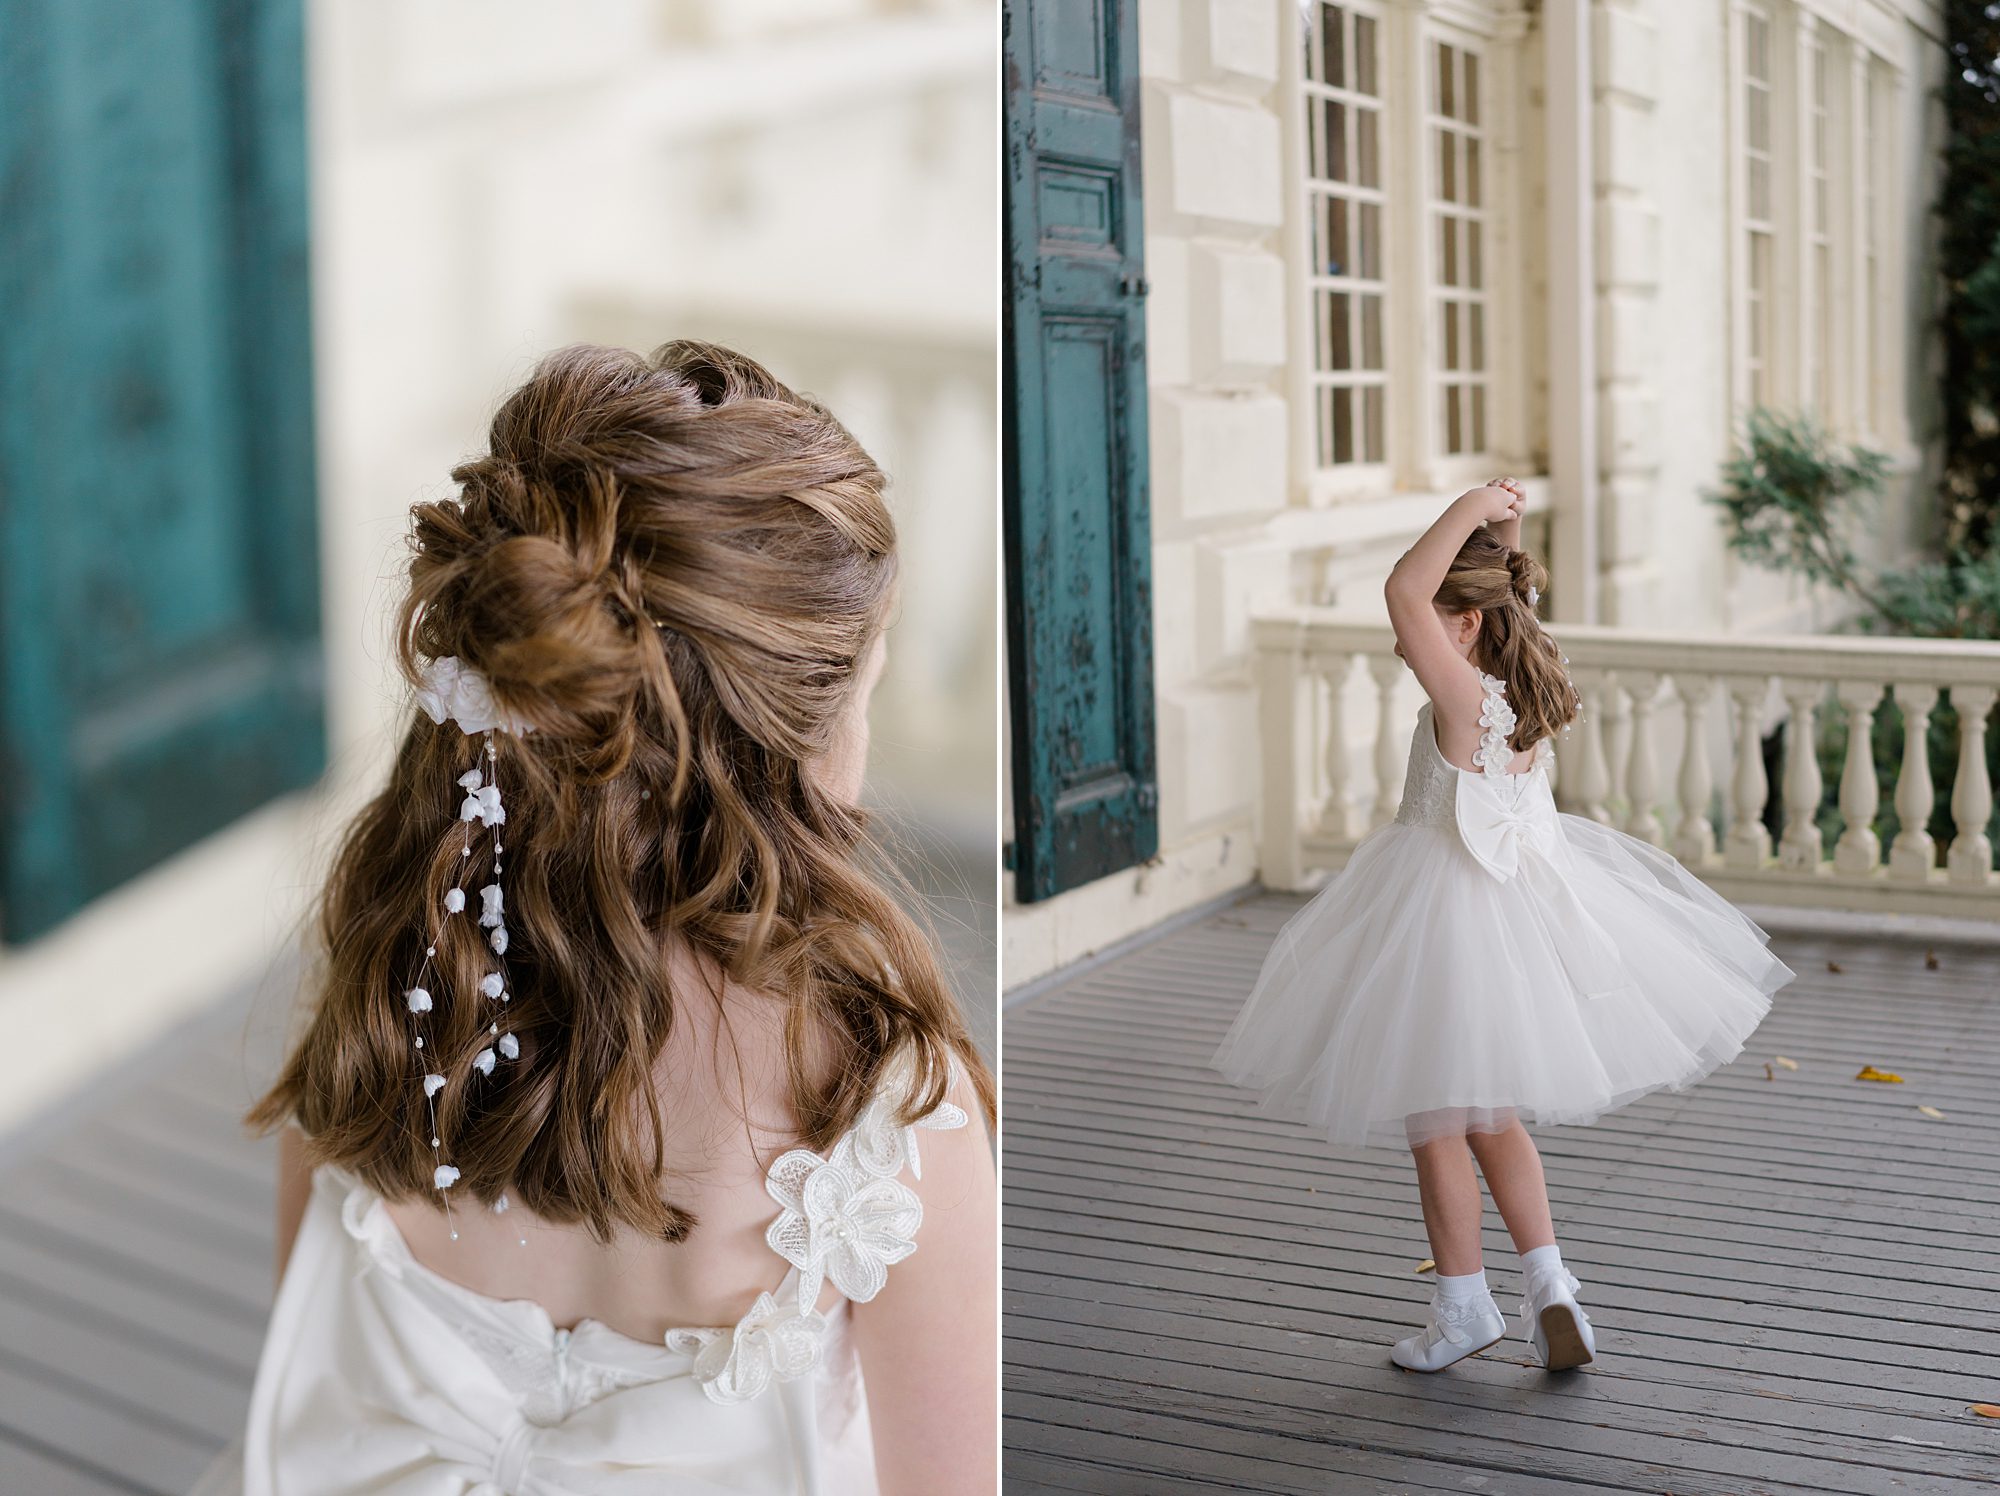 flower girl spins on porch and shows off hair style